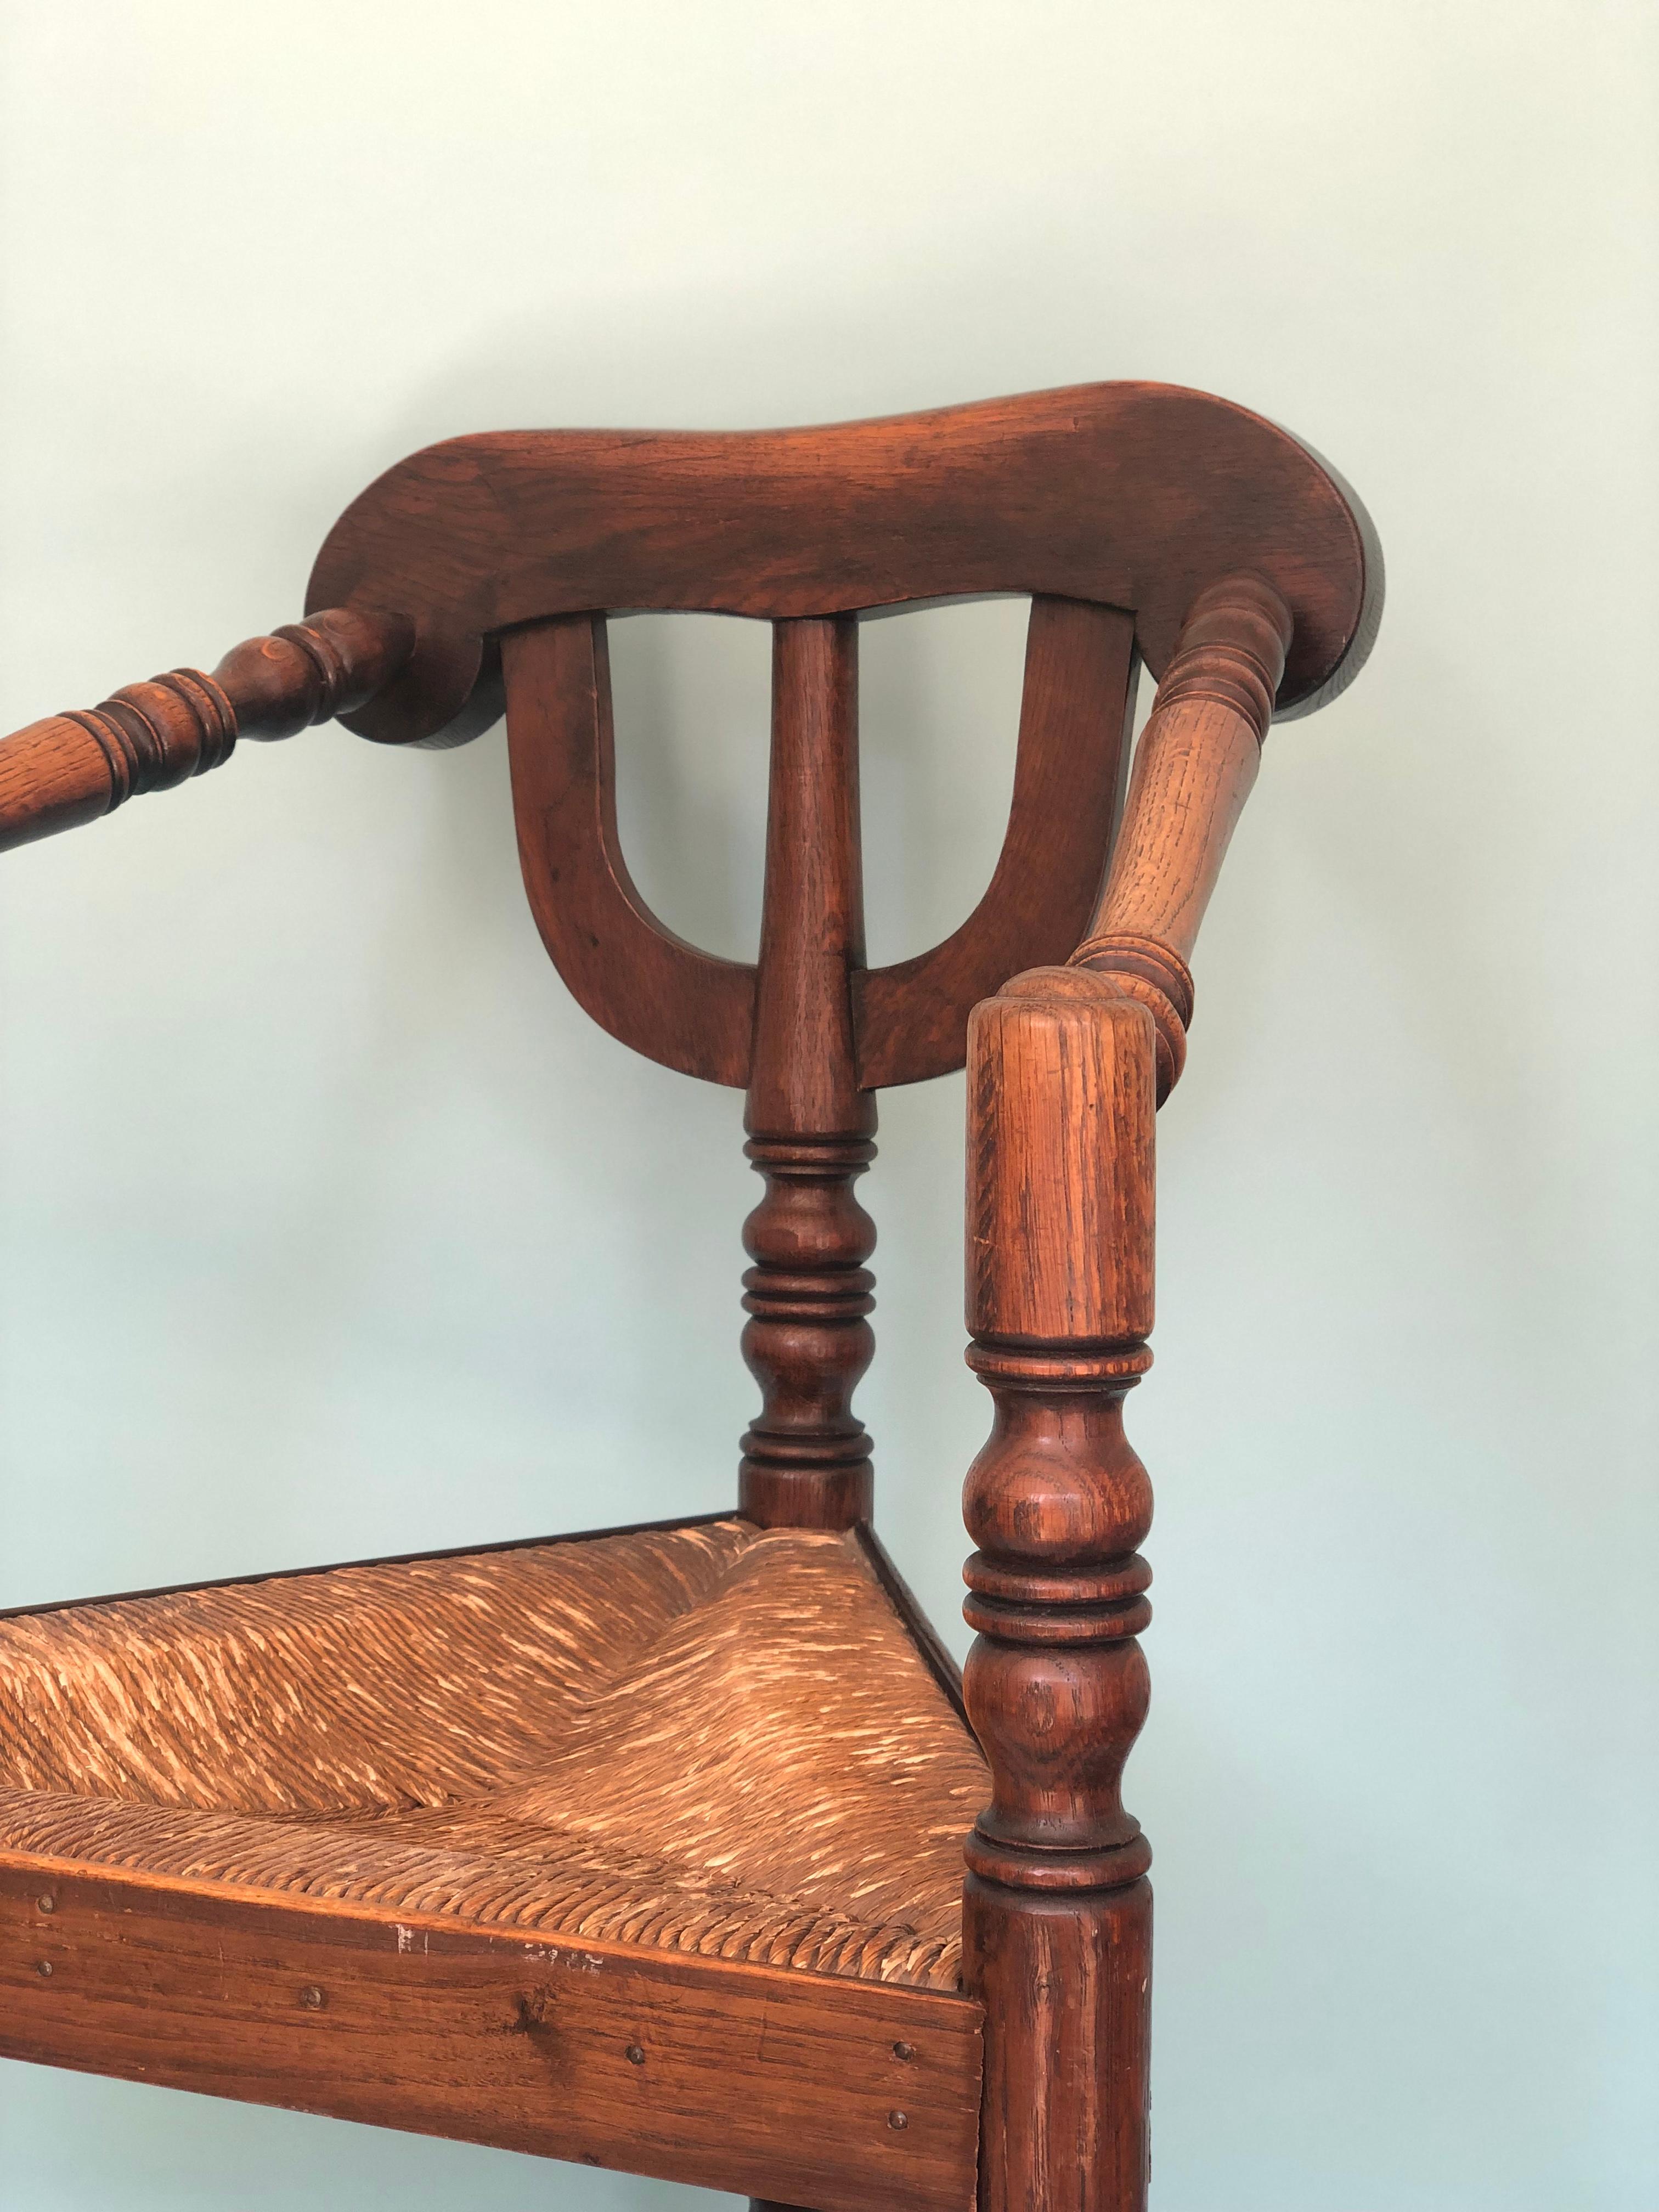 A beautiful and sturdy corner chair from the United Kingdom, early 20th century. The Walnut chair has carved details in the legs and armrests and has a rush seat. In good condition.

Object: Chair
Design: Unknown
Style: Antique,
Period: